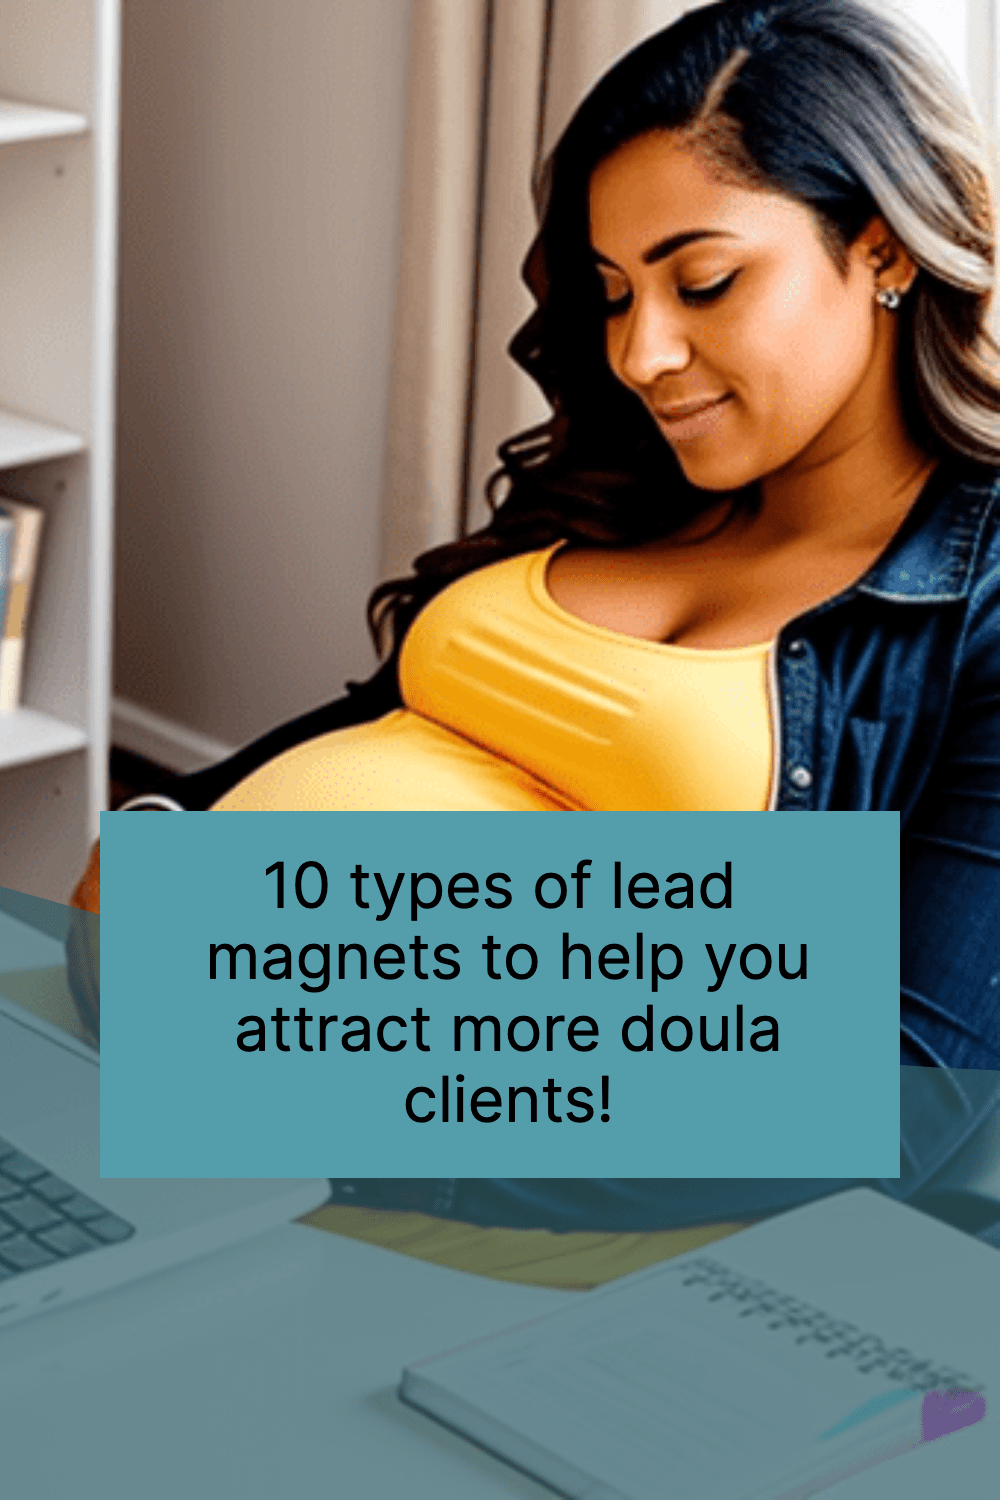 10 types of lead magnets to help you attract more doula clients